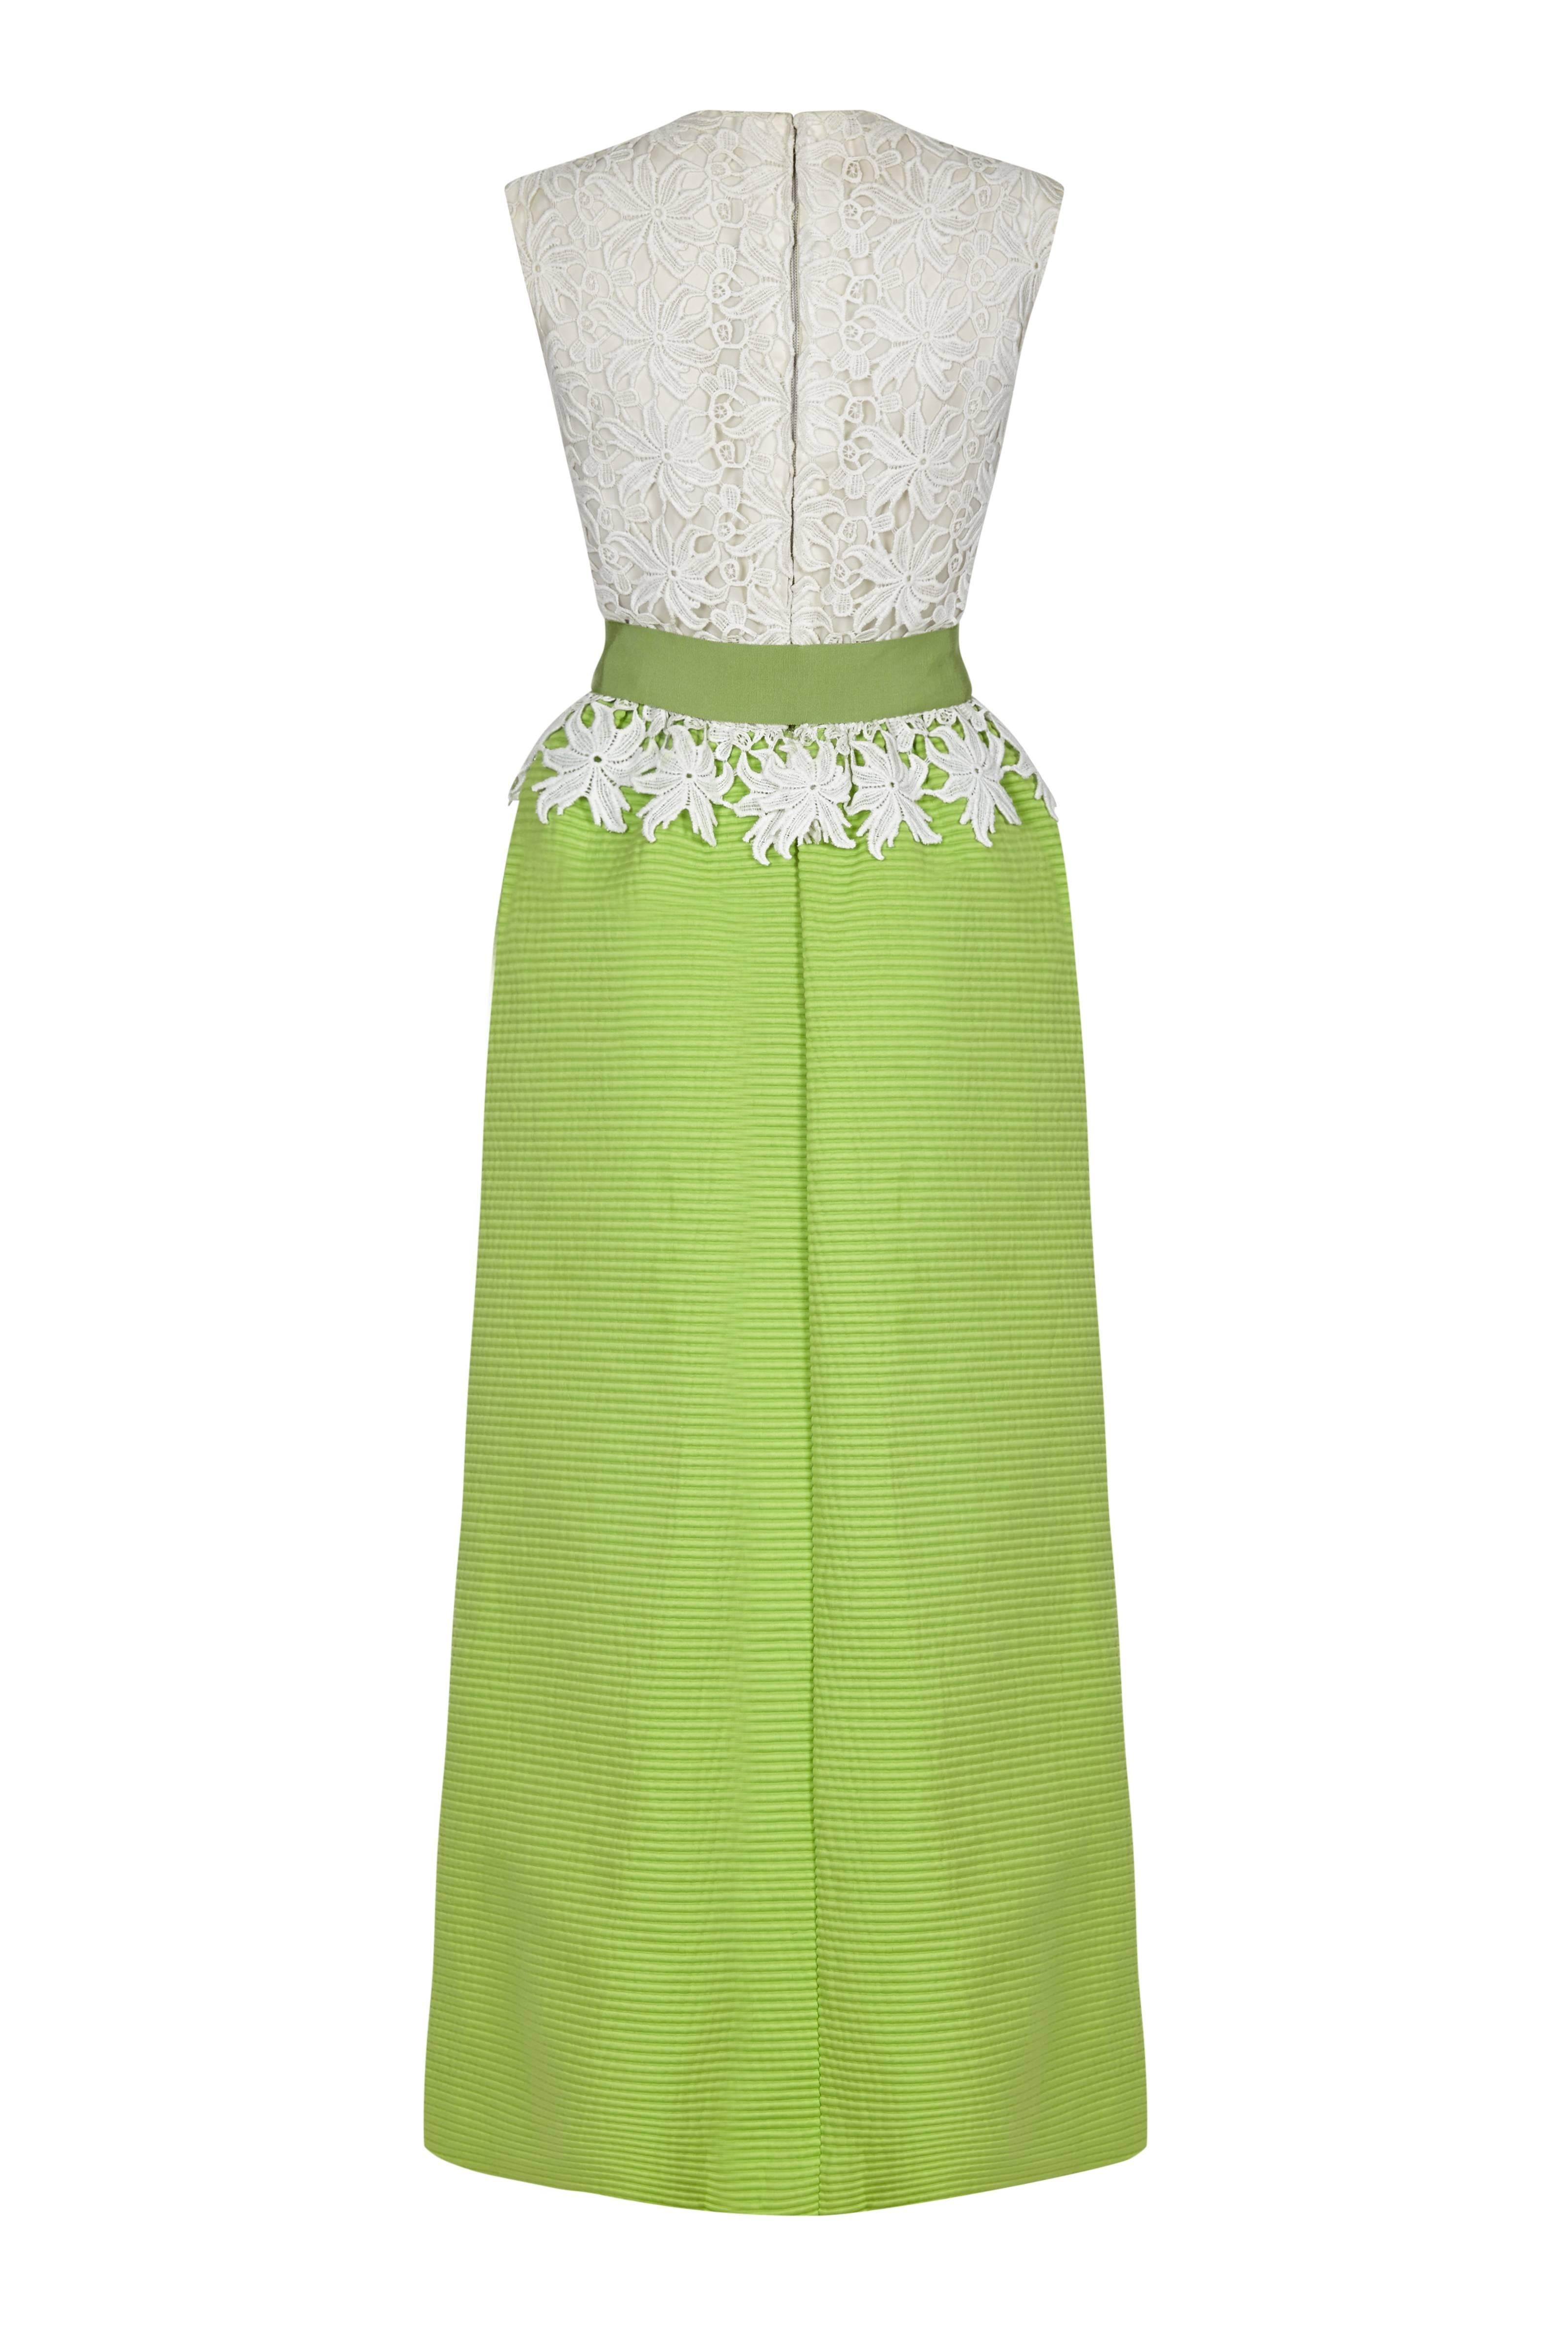 This magnificent 1960s Belinda Belville occasion dress is an arresting combination of colour, texture and construction. The simple round necked, sleeveless fitted bodice has a boldly textured white lace overlay that finishes just above the hip,